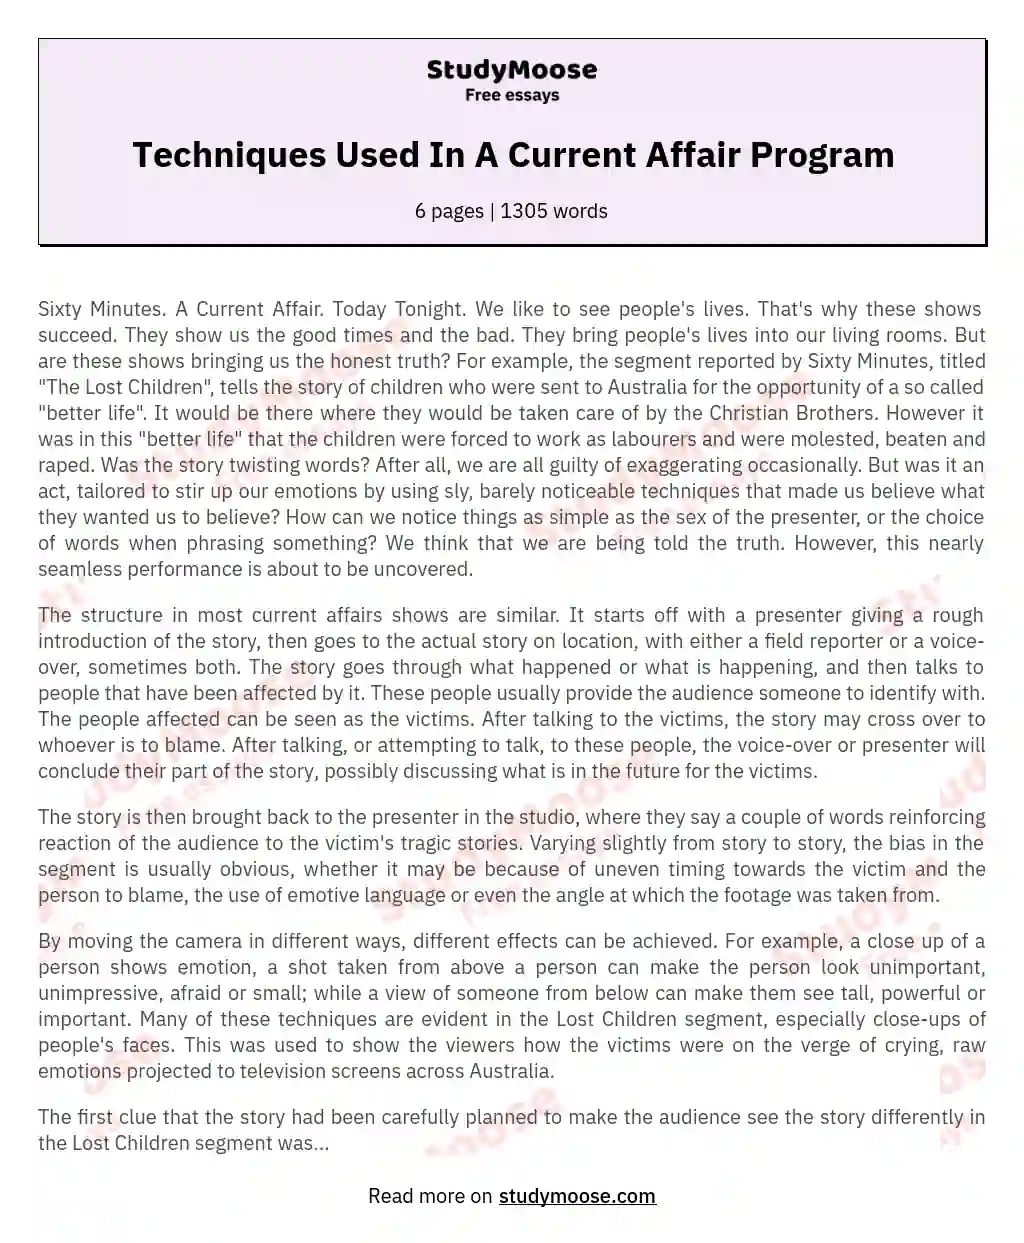 Techniques Used In A Current Affair Program essay